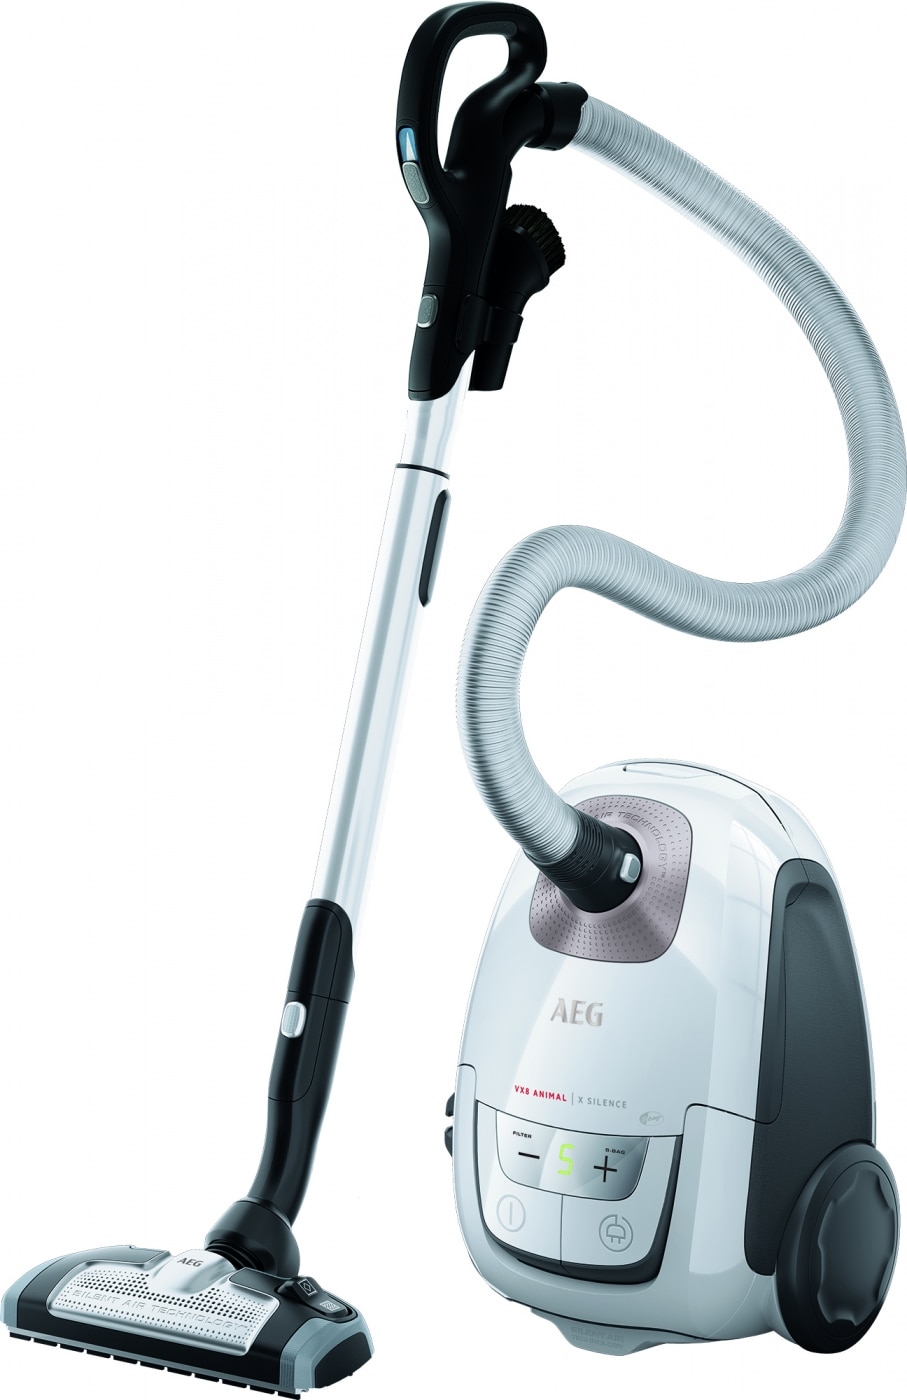 Electrolux vacuum cleaner retakes position as world's most silent